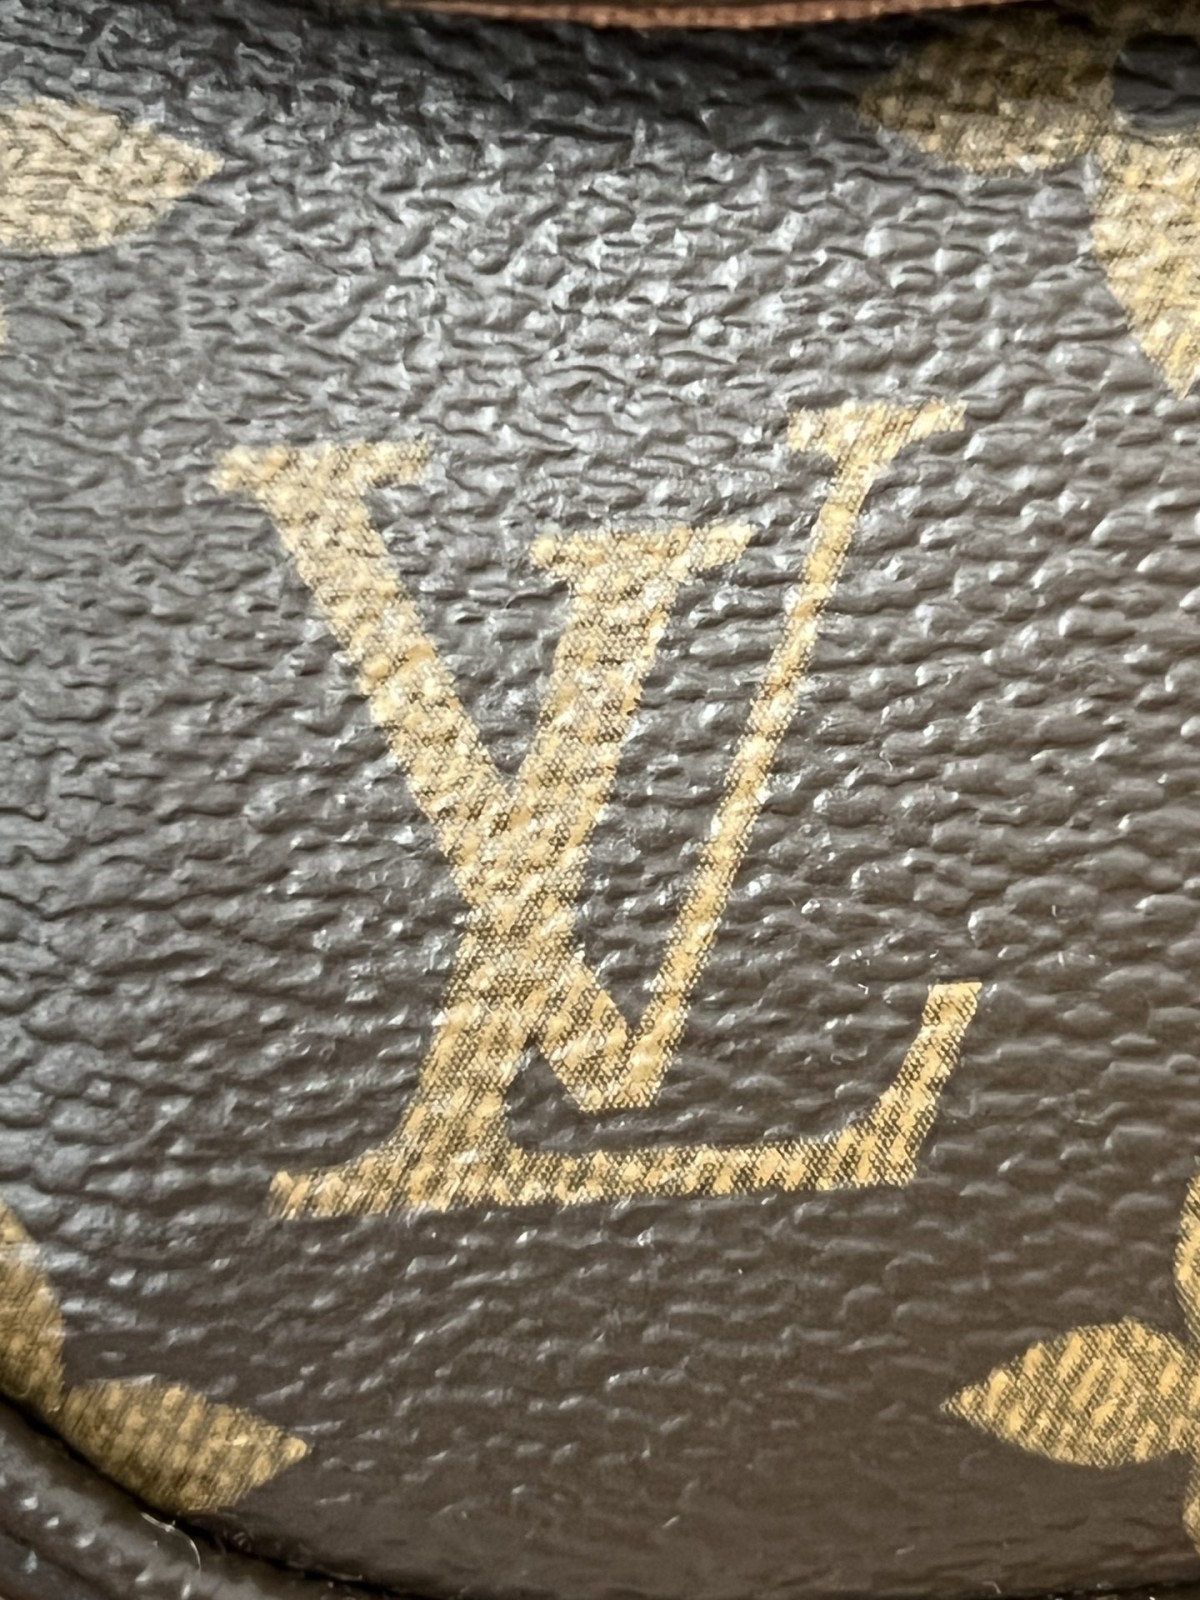 How good quality is a M81911 LOUIS VUITTON WALLET ON CHAIN IVY（2023 new edition）-Best Quality Fake Louis Vuitton Bag Online Store, Replica designer bag ru